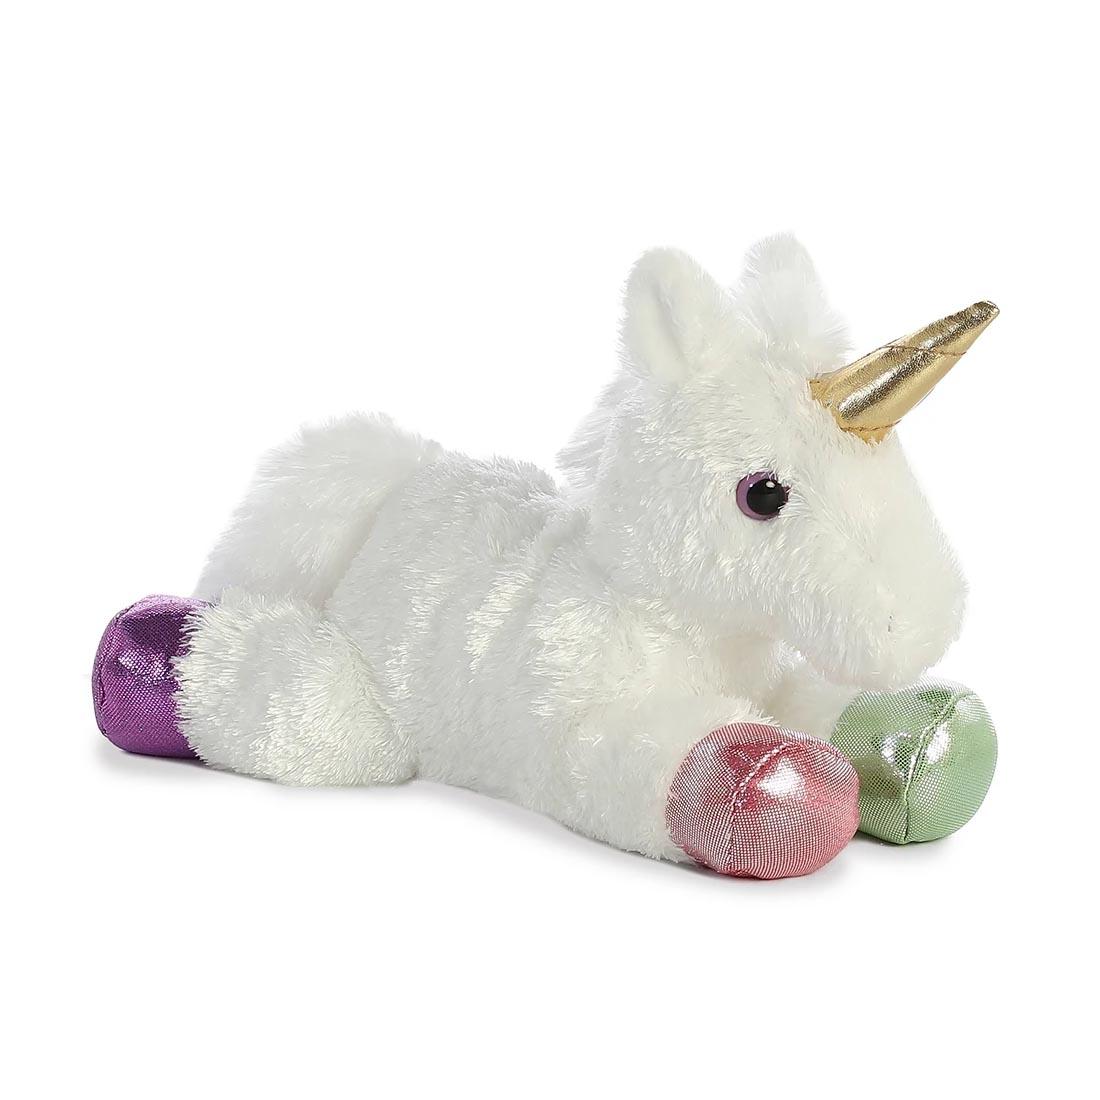 white unicorn stuffed animal with shiny colored hooves and horn